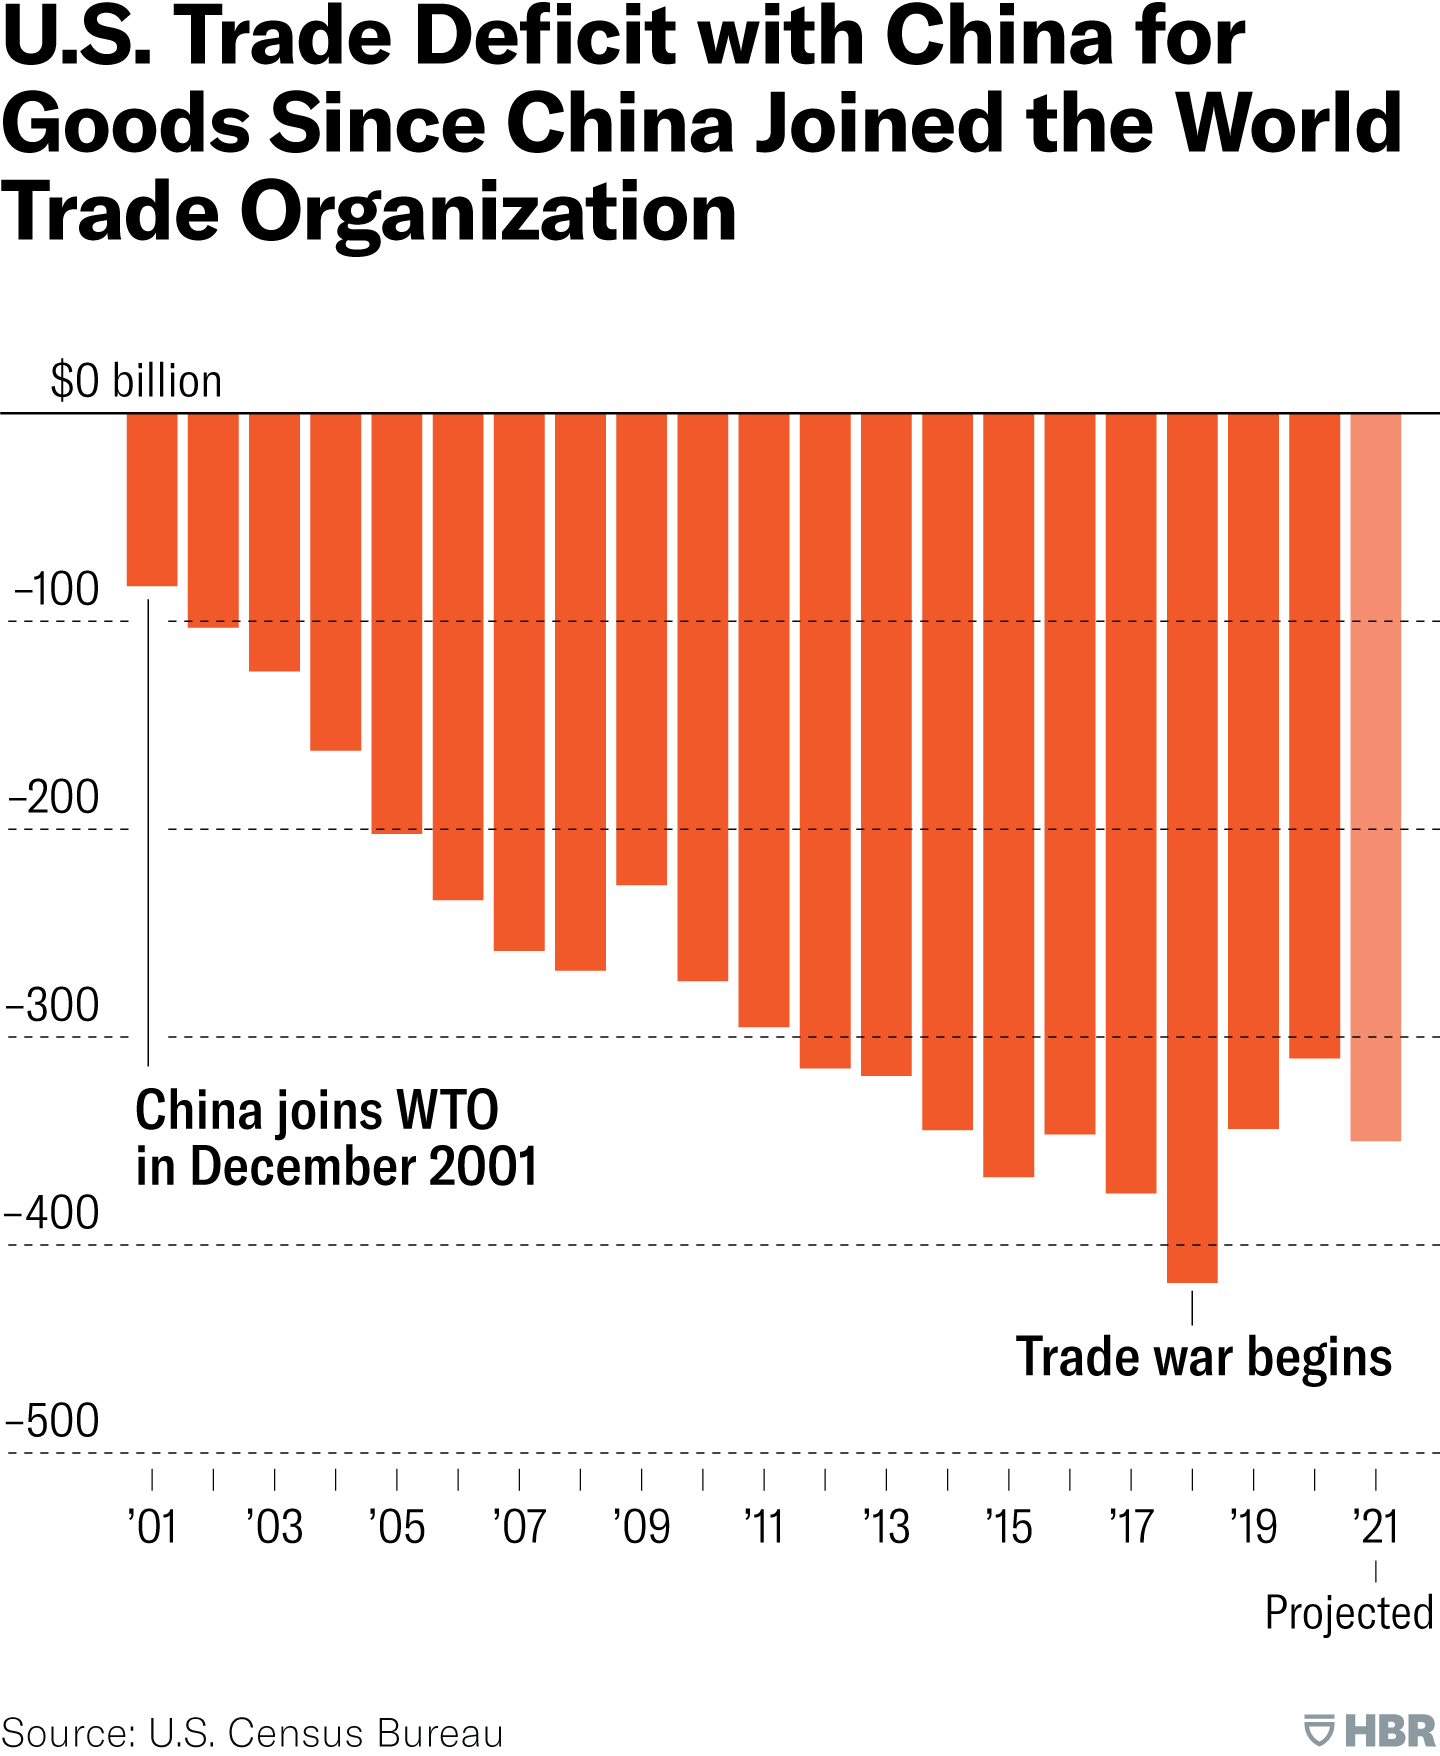 A New Approach to Rebalancing the U.S-China Trade Deficit